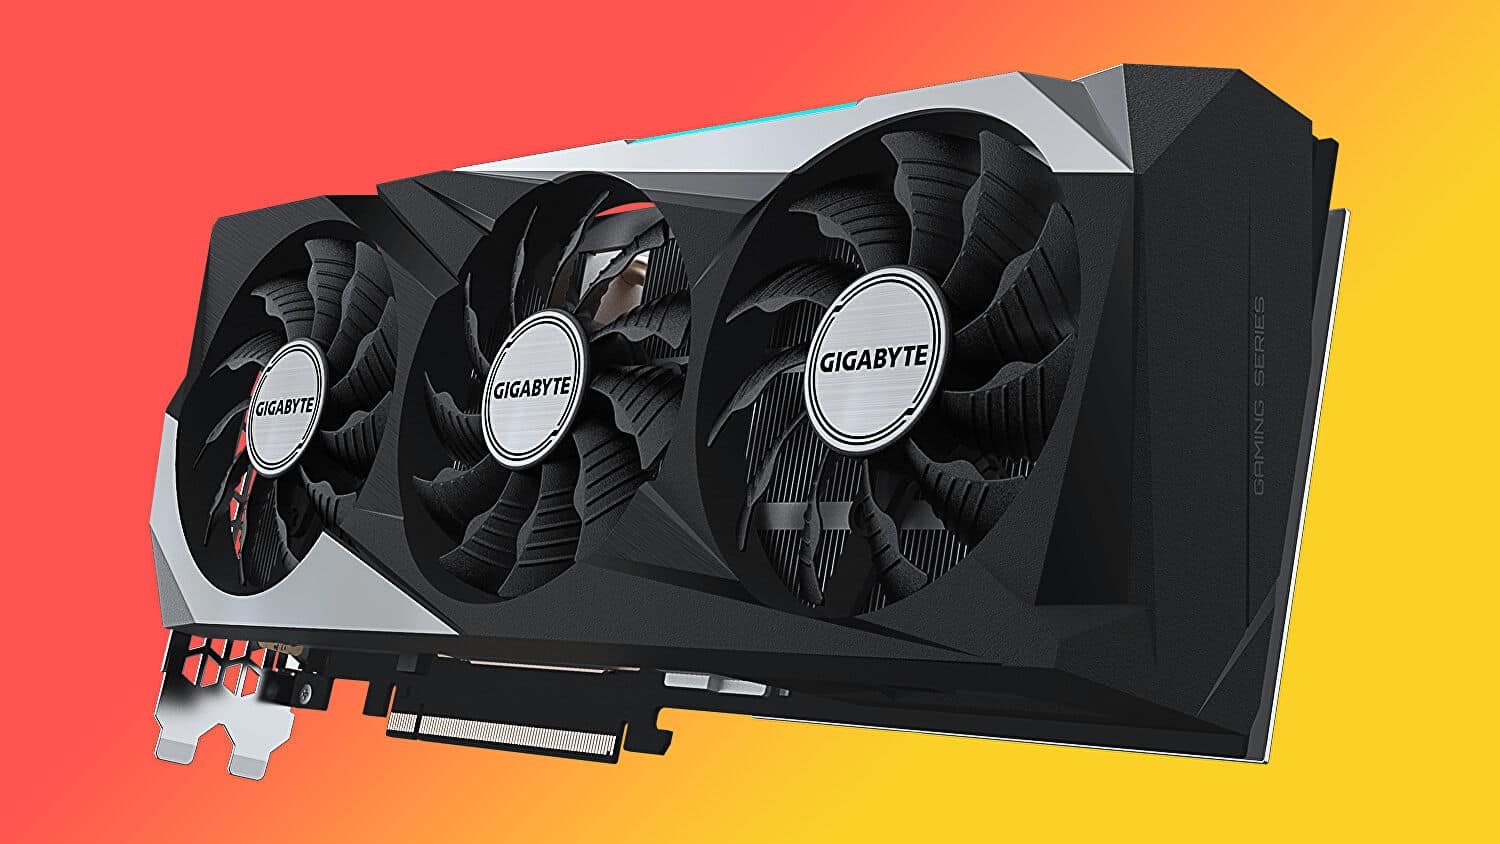 This RX 6900 XT graphics card is £750 - that's £250 below its UK RRP